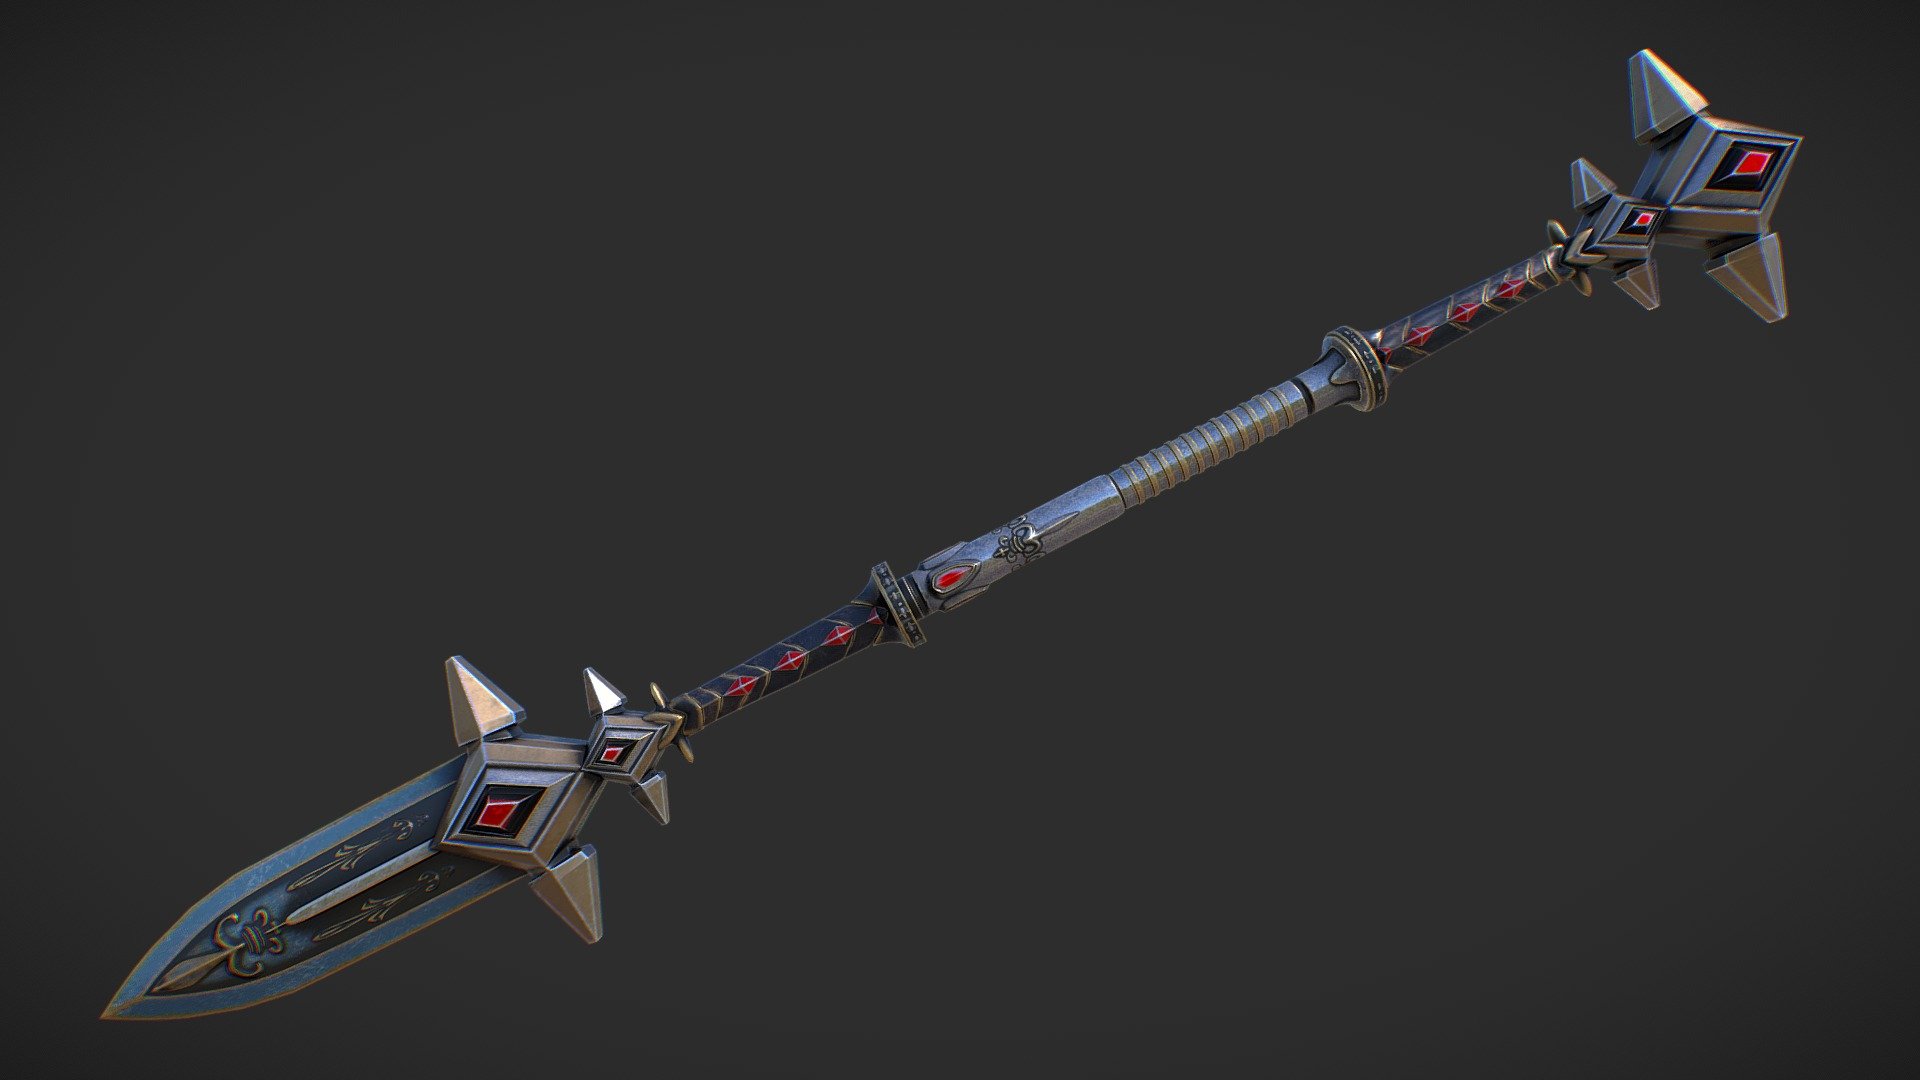 Hello. This is a high definition quality polygon of a Combat staff 1 3D Model with PBR textures. Extremely detailed and realistic. Suitable for movie prop, architectural visualizations, advertising renders and other. The archive includes Obj and FBX, textures for the Unity: Base color, Height, Metallic, Mixed AO, Normal_OpenGL, Roughness. And also included in the archive textures for UE: BaseColor, Normal, OcclusionRoughnessMetallic. All textures are 4k resolution. The model contains 1 object: Combat staff 1 3d model